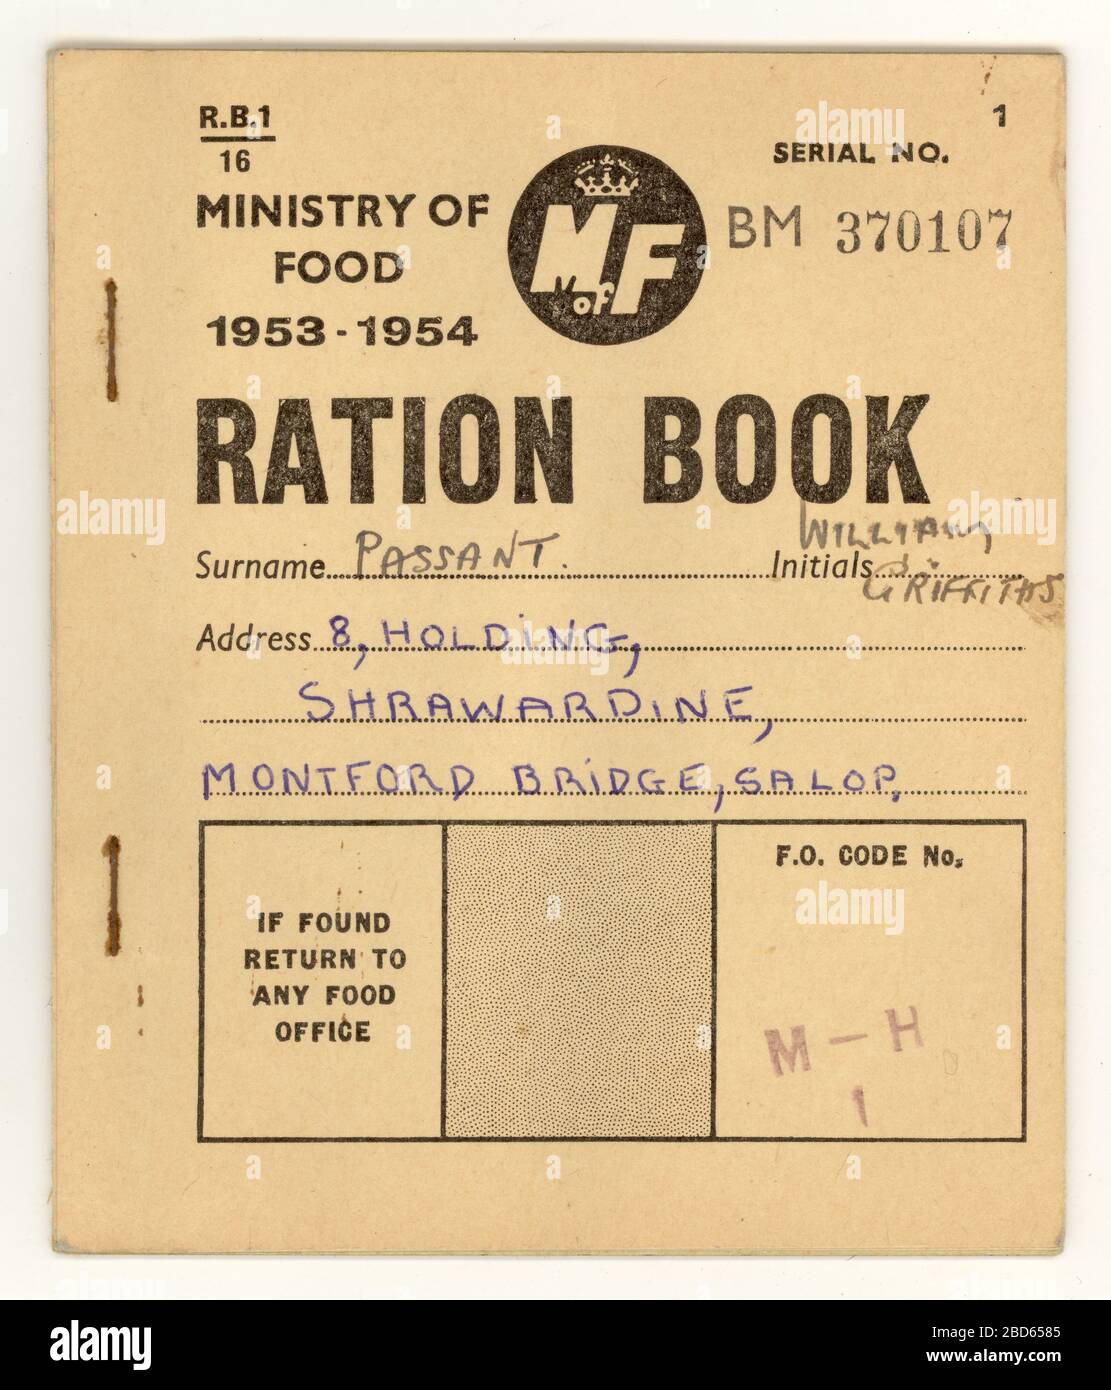 Post war 1953-54 ration book, ministry of food, for a resident of Shropshire, England, U.K. Stock Photo